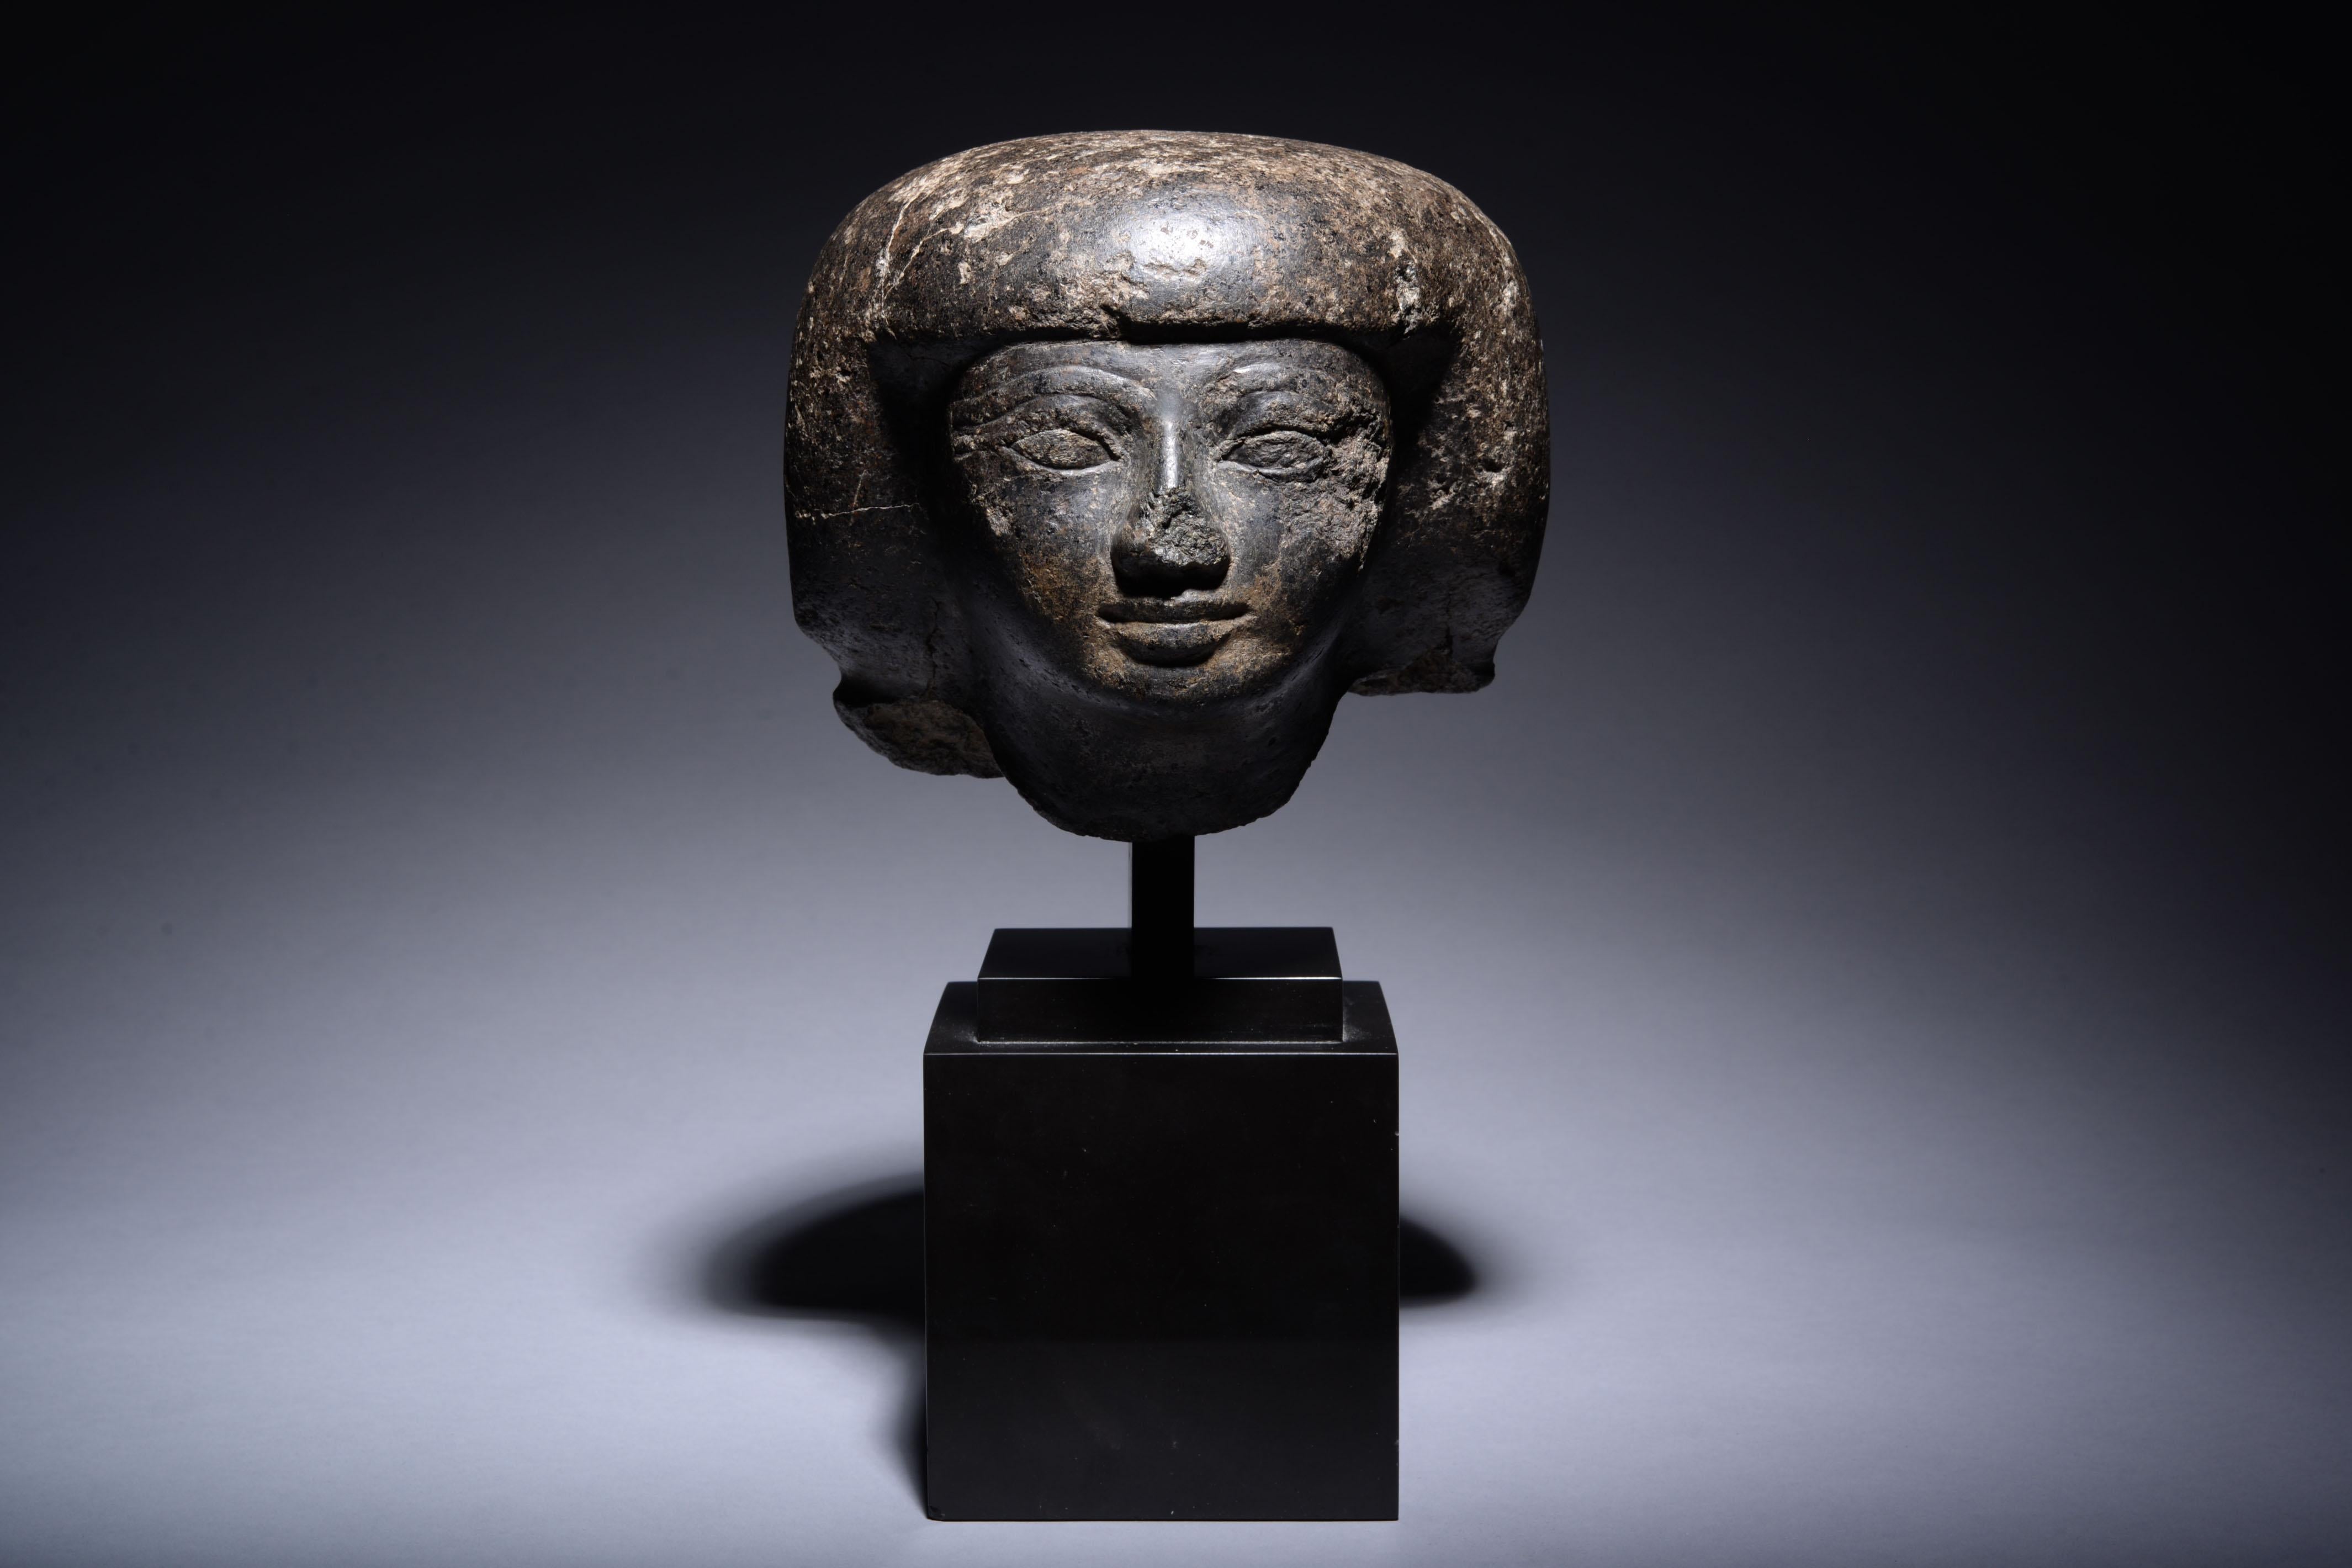 Egyptian head of a man, carved granite. 18th Dynasty, circa 1550-1292 B.C.

Carved in beautiful dark granite, this head depicts an elite individual, perhaps a government official. The man is shown with a round, fleshy face, full, gently smiling